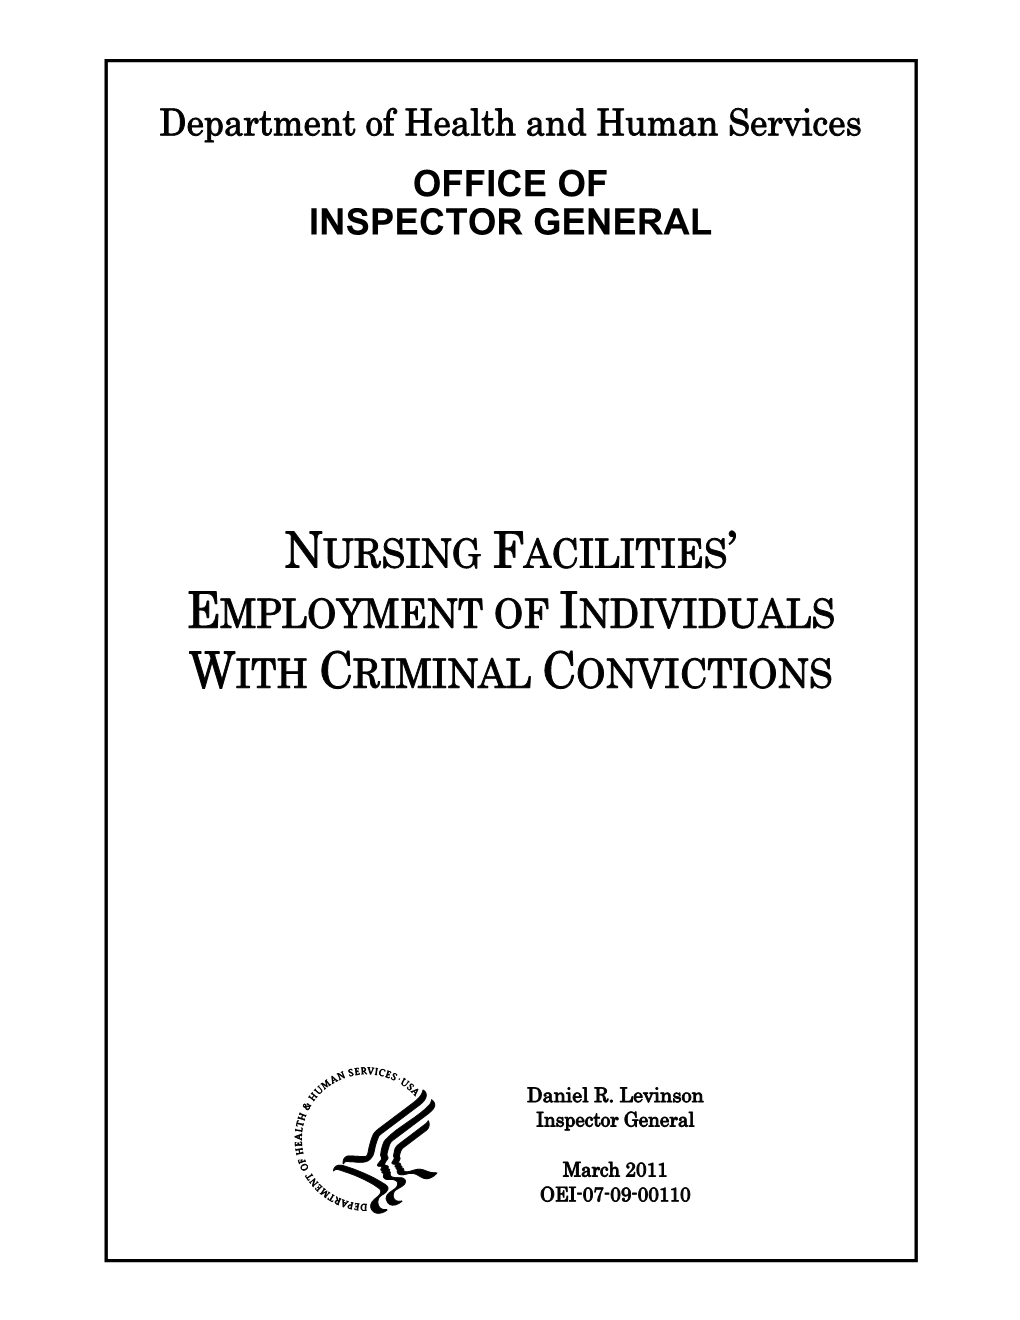 Nursing Facilities Employment of Individuals with Criminal Convictions